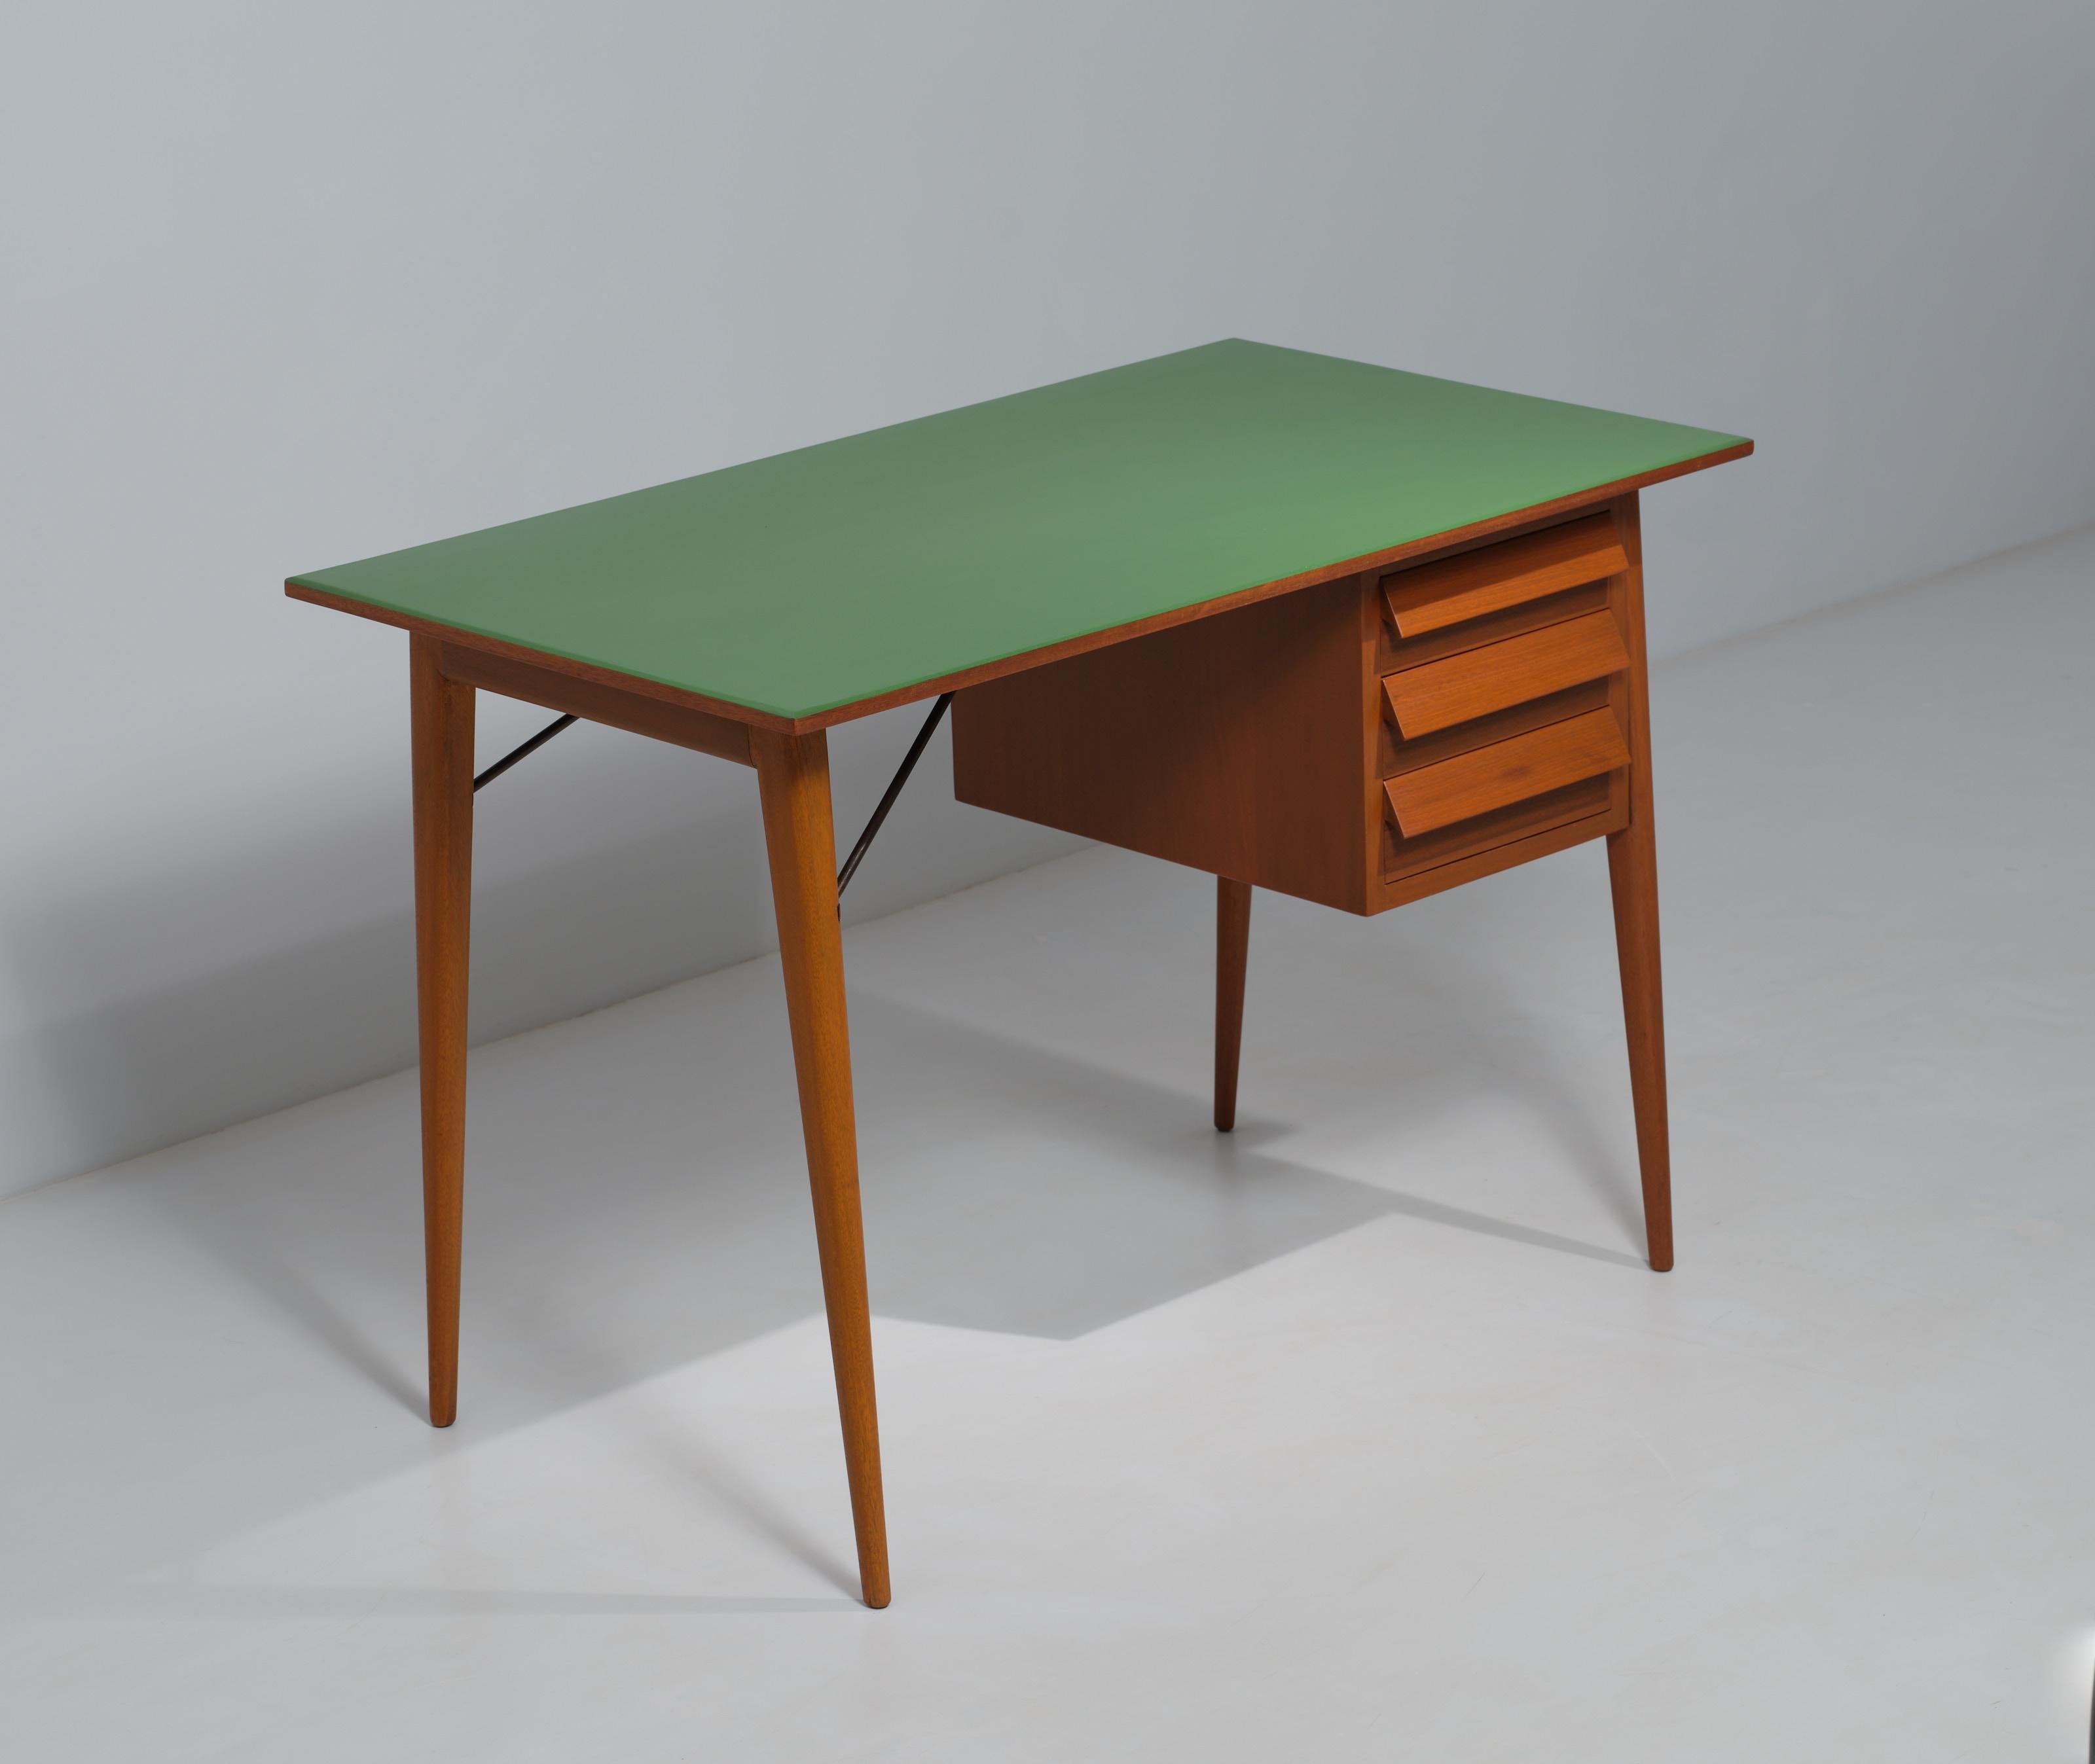 Italian Mid-Century Modern Teak Desk with Green Lacquer and Meticulous Restoration